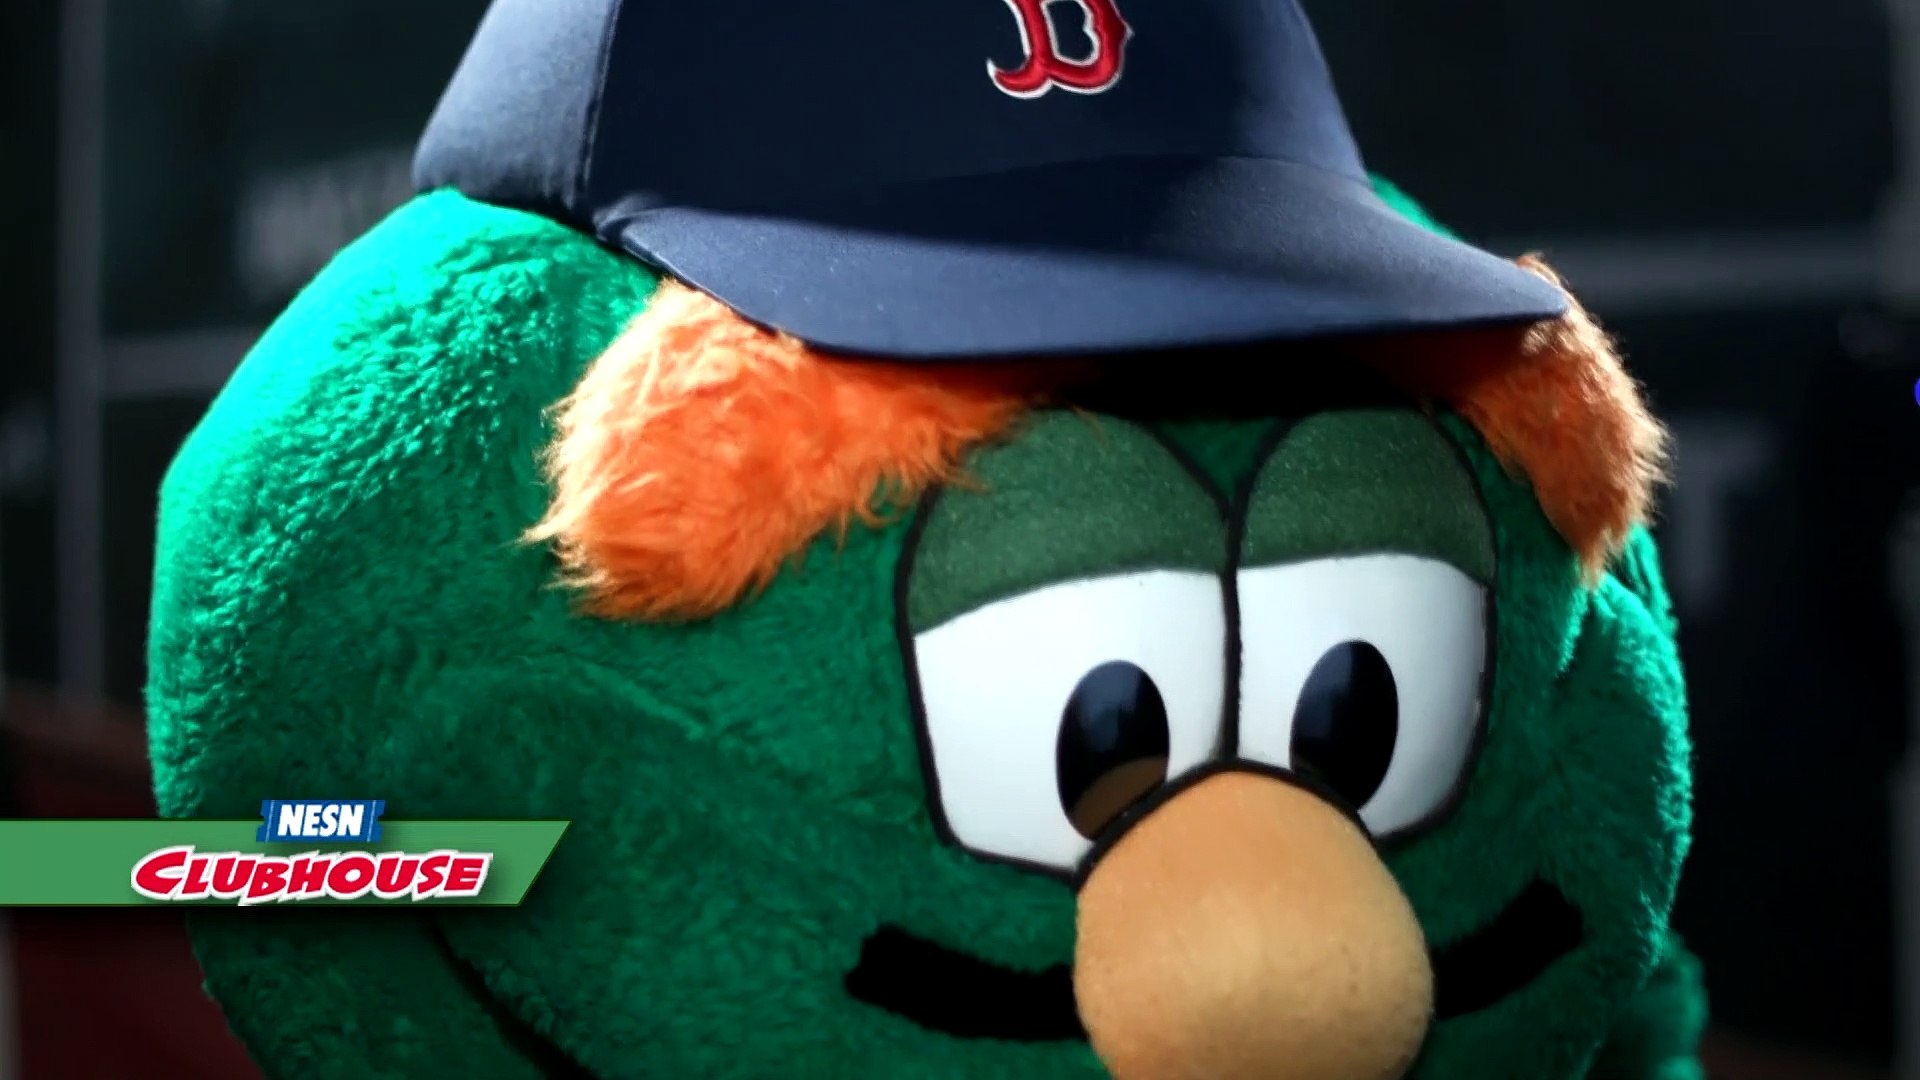 NESN Clubhouse: 'My Story' With Wally the Green Monster - video Dailymotion